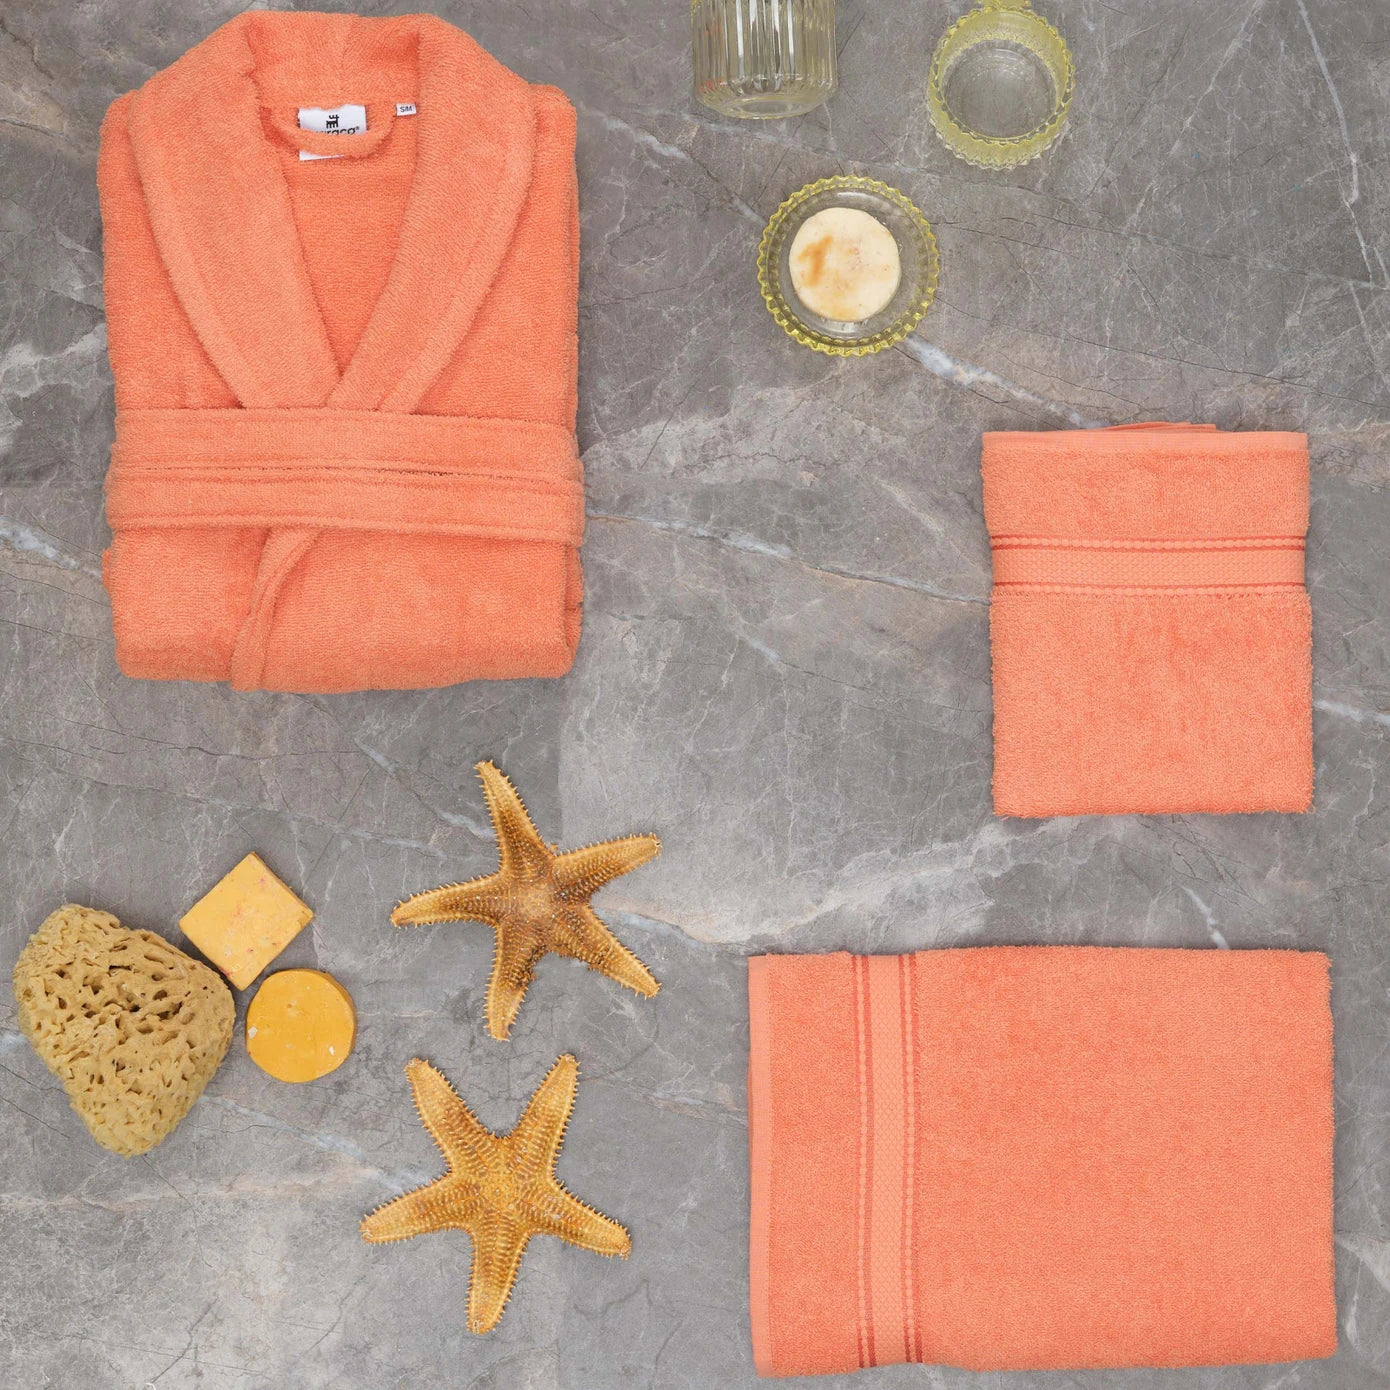 Salmon-colored bathrobe made from 100% cotton, offering comfort and style.